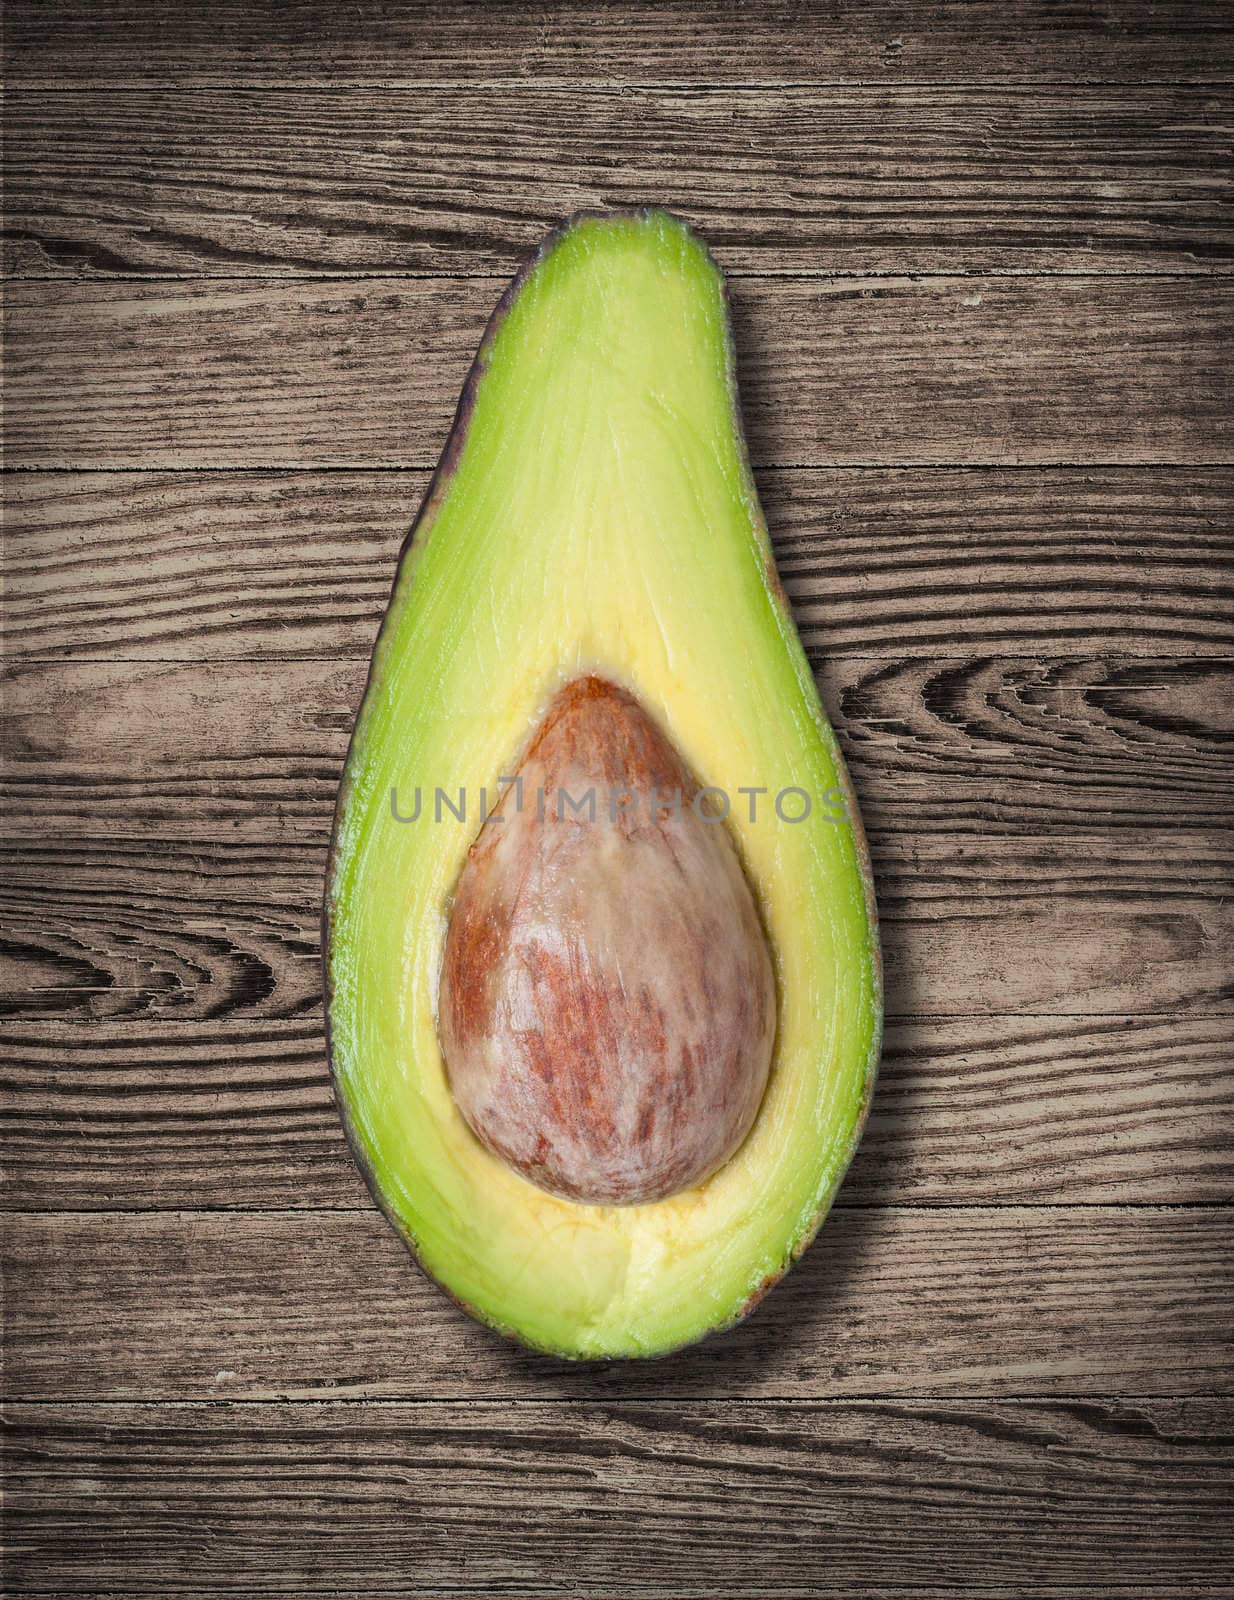 Avocado cut on wooden table, close up.